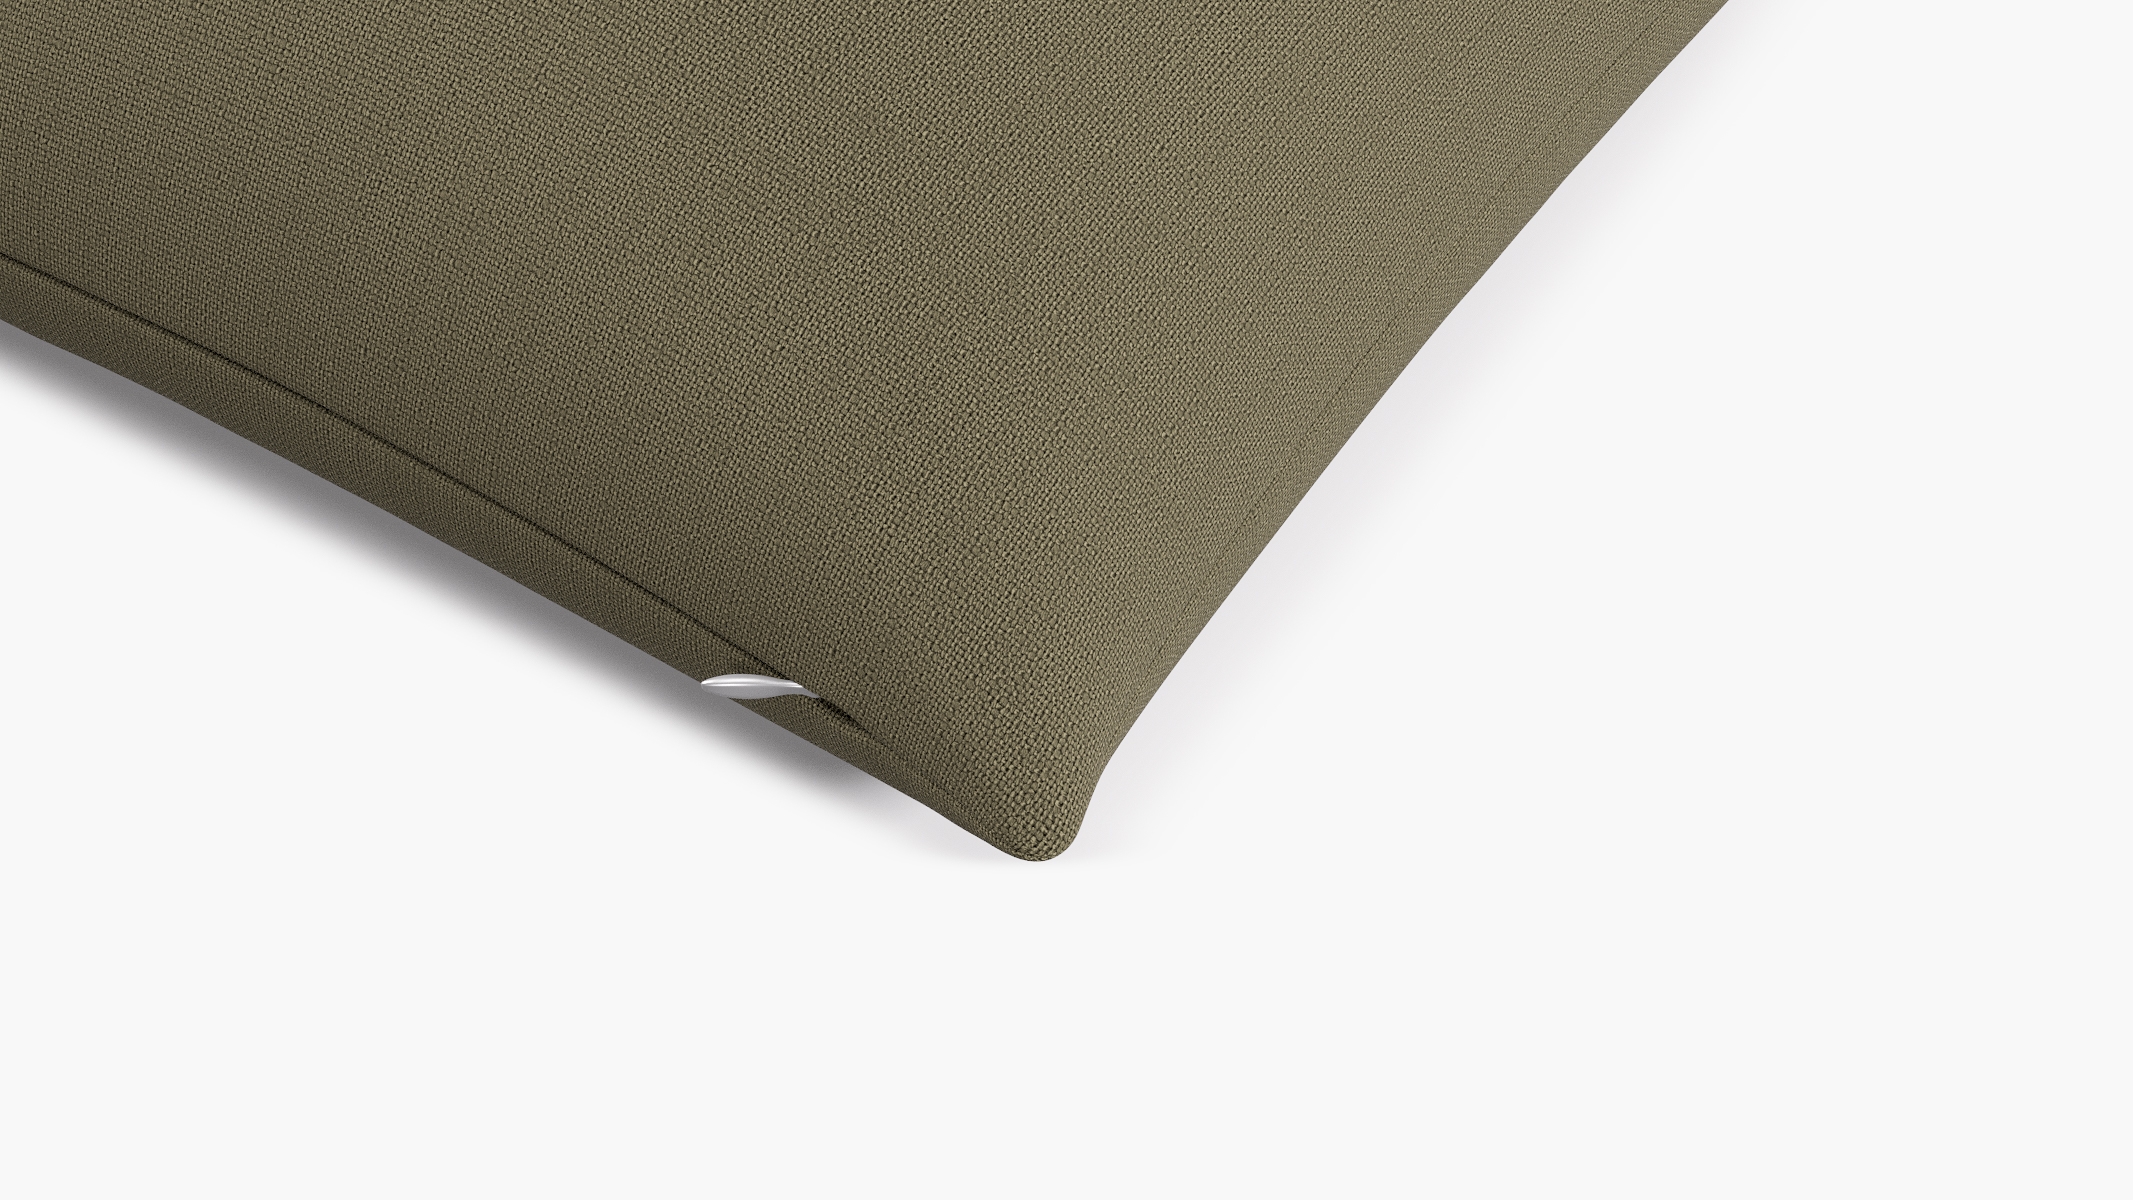 Throw Pillow 20", Olive Everyday Linen, 20" x 20" - Image 1